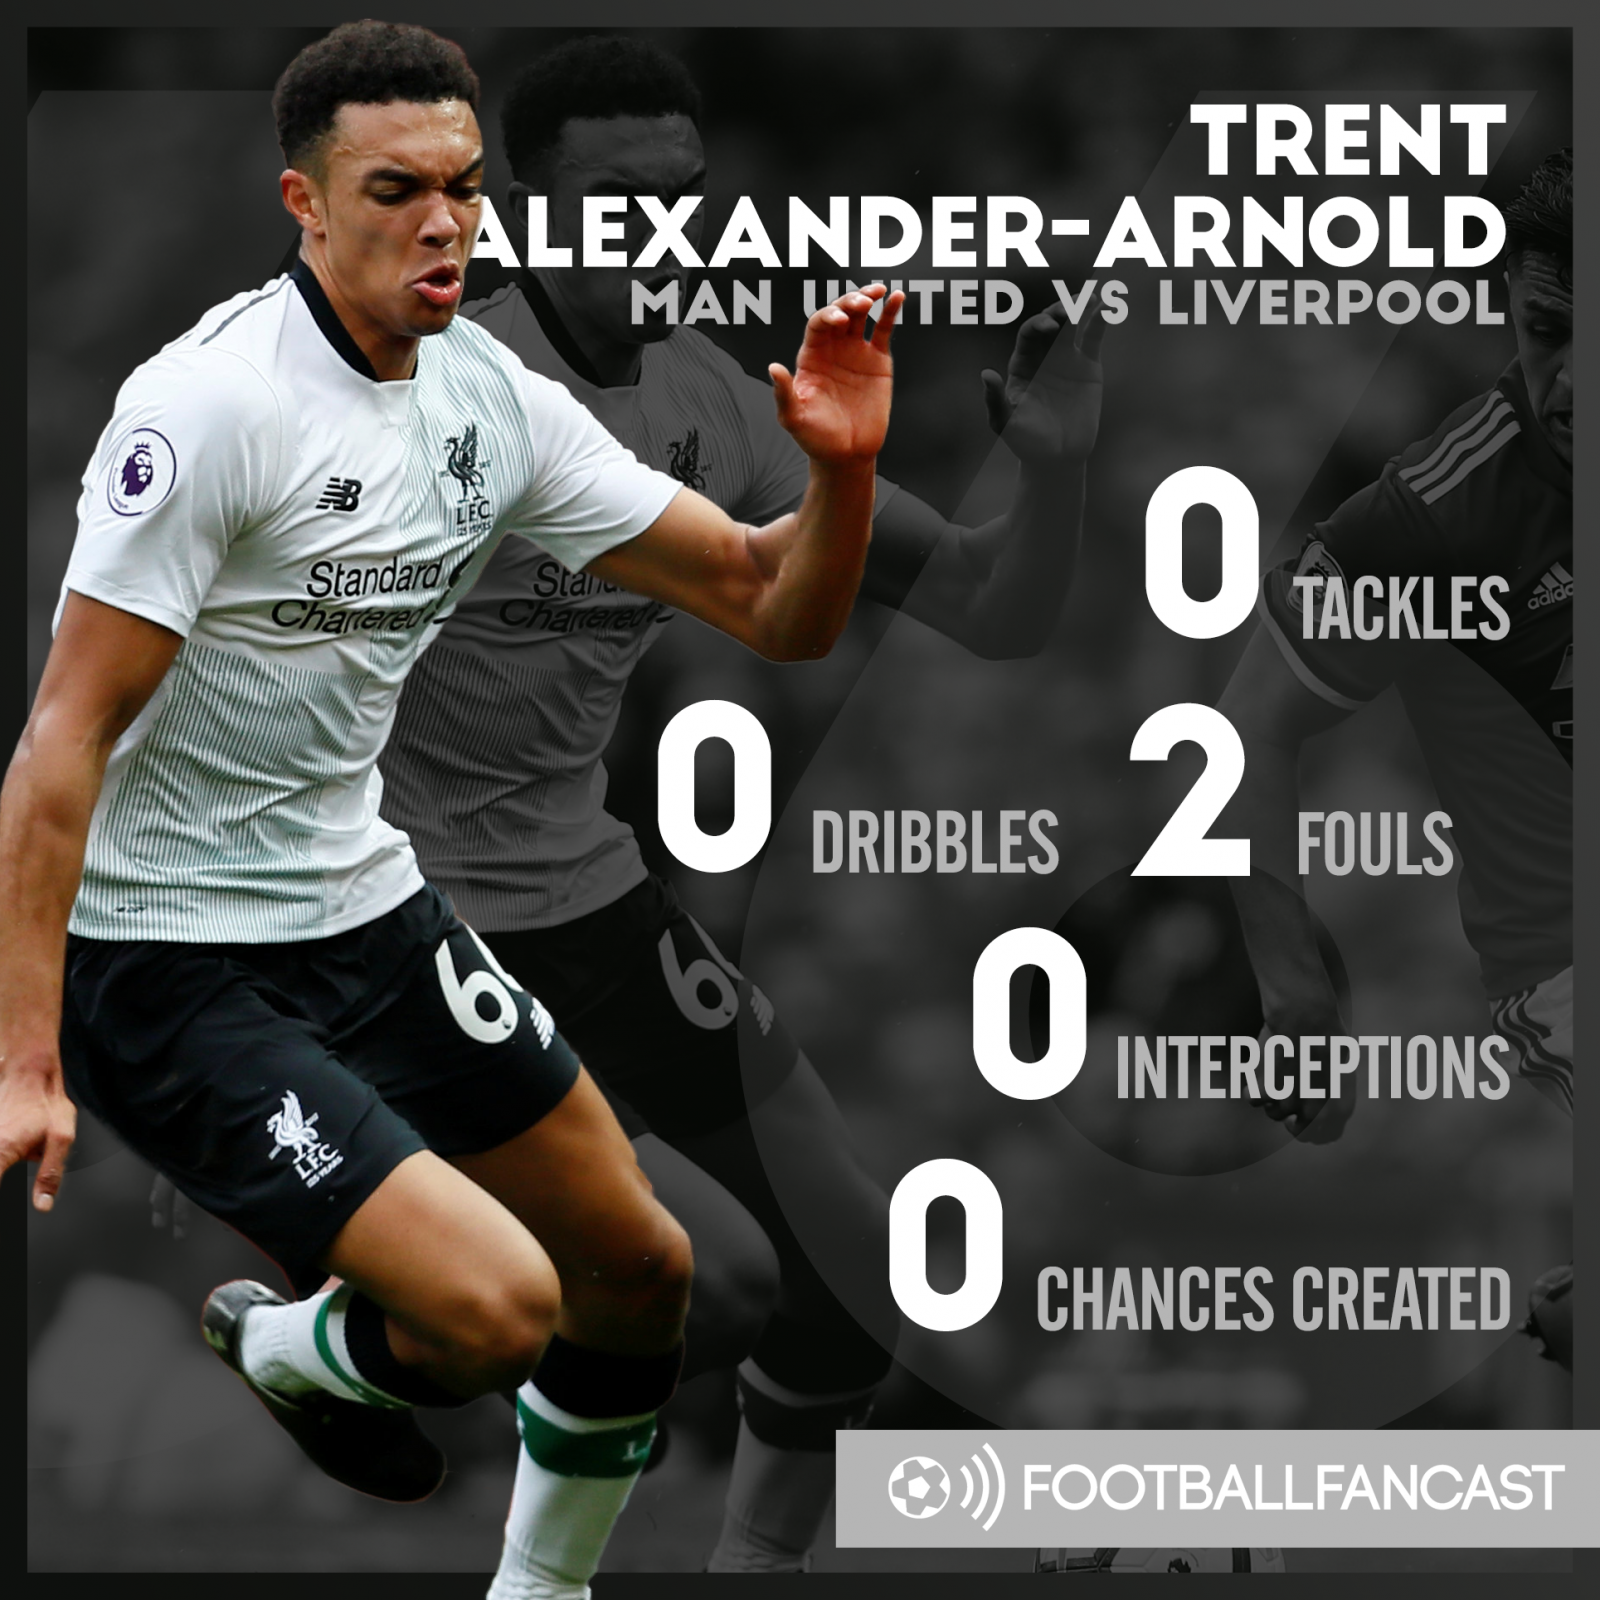 Trent Alexander-Arnold's stats from Liverpool's 2-1 defeat to Manchester United